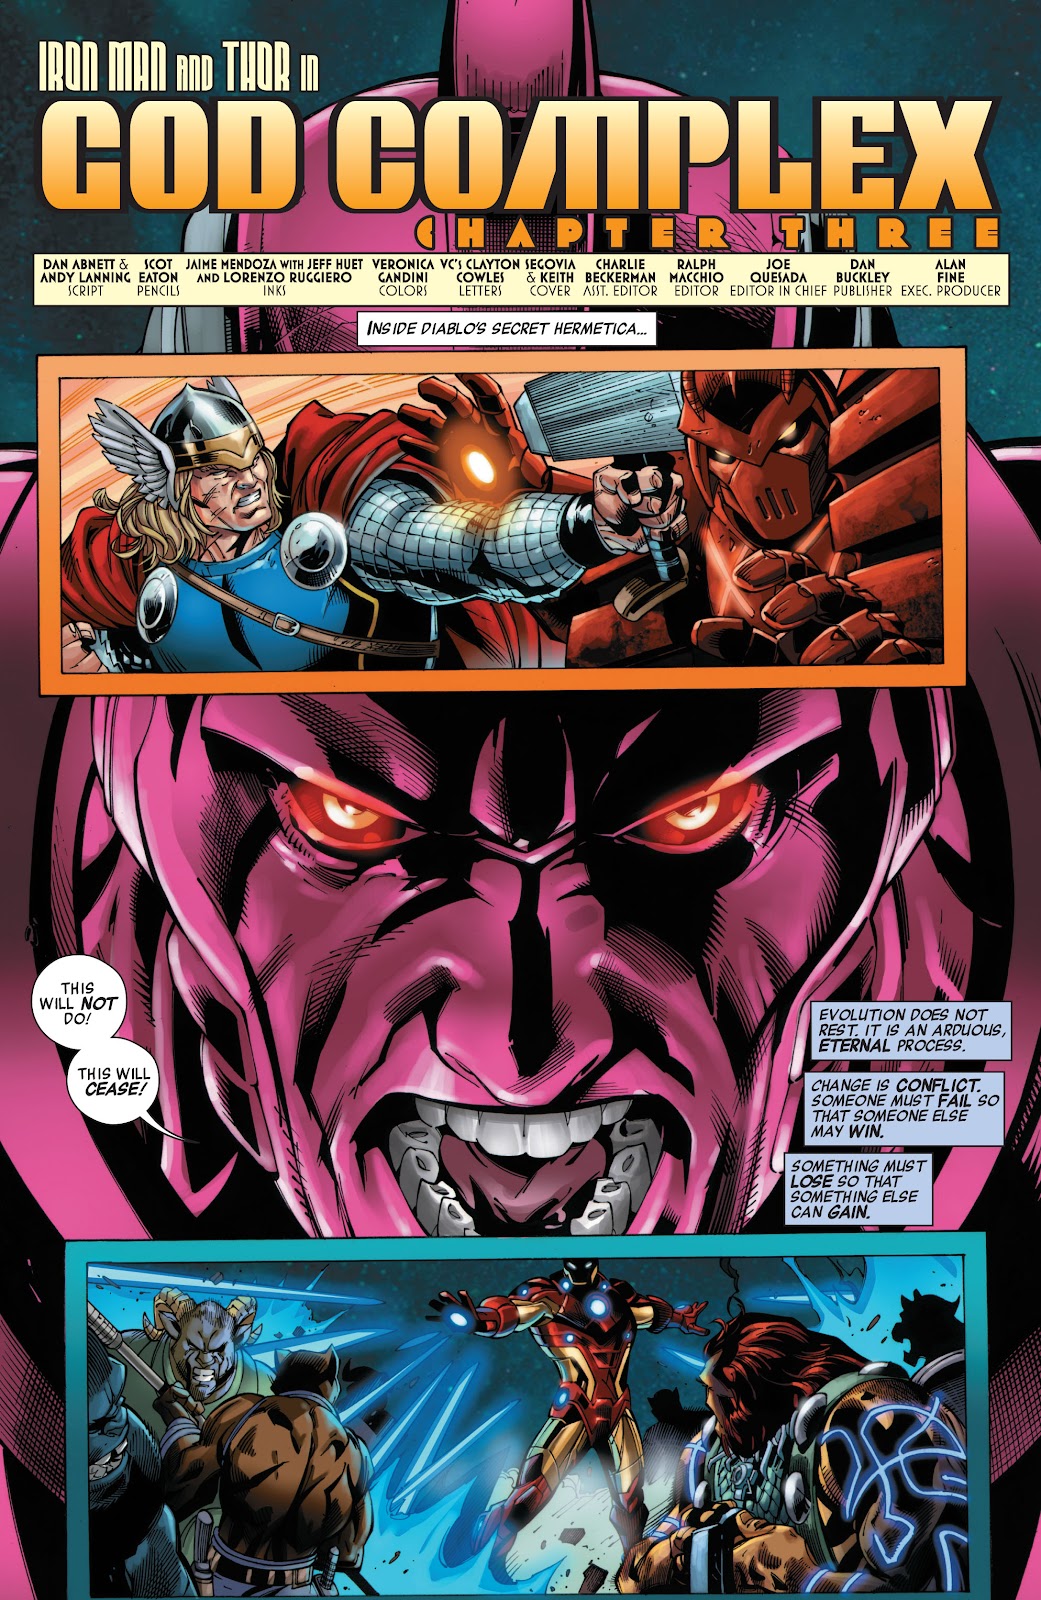 Iron Man/Thor issue 3 - Page 2